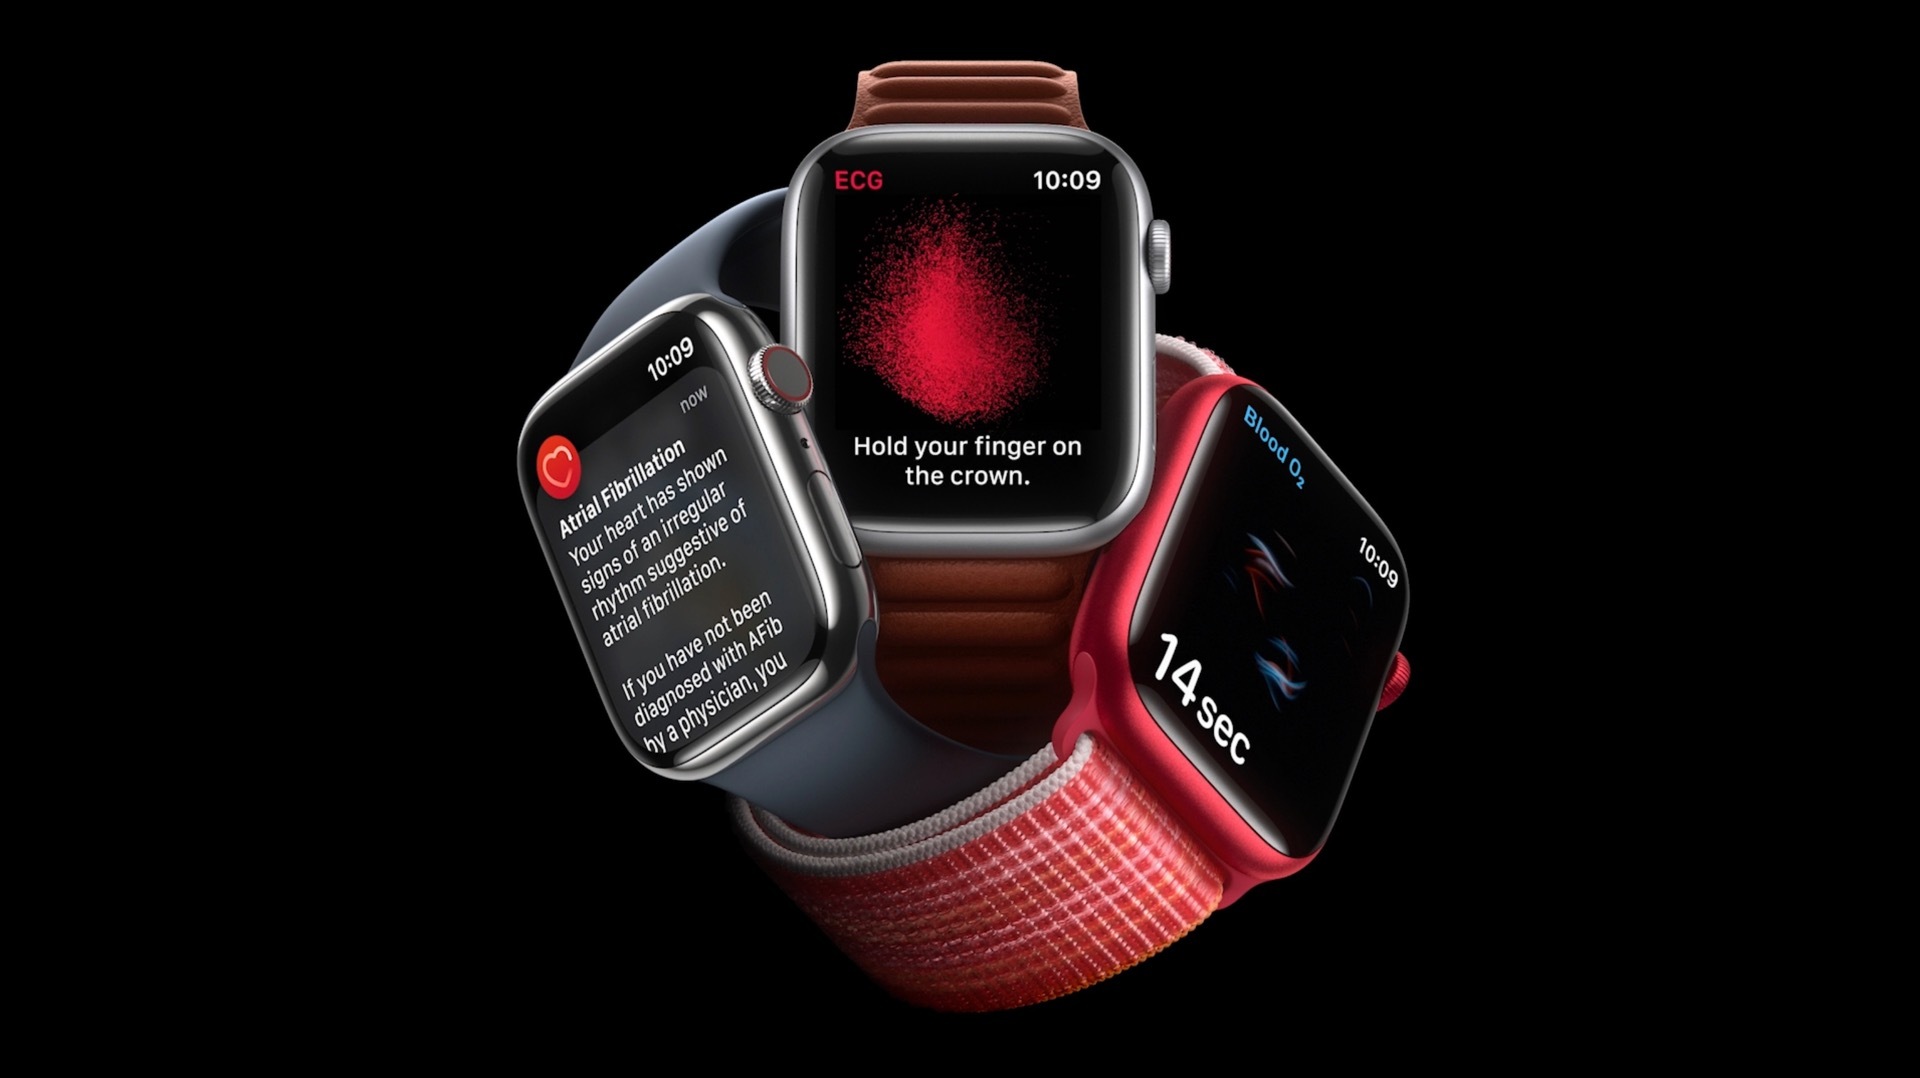 New Apple Watches unveiled with focus on health and safety | Ars Technica